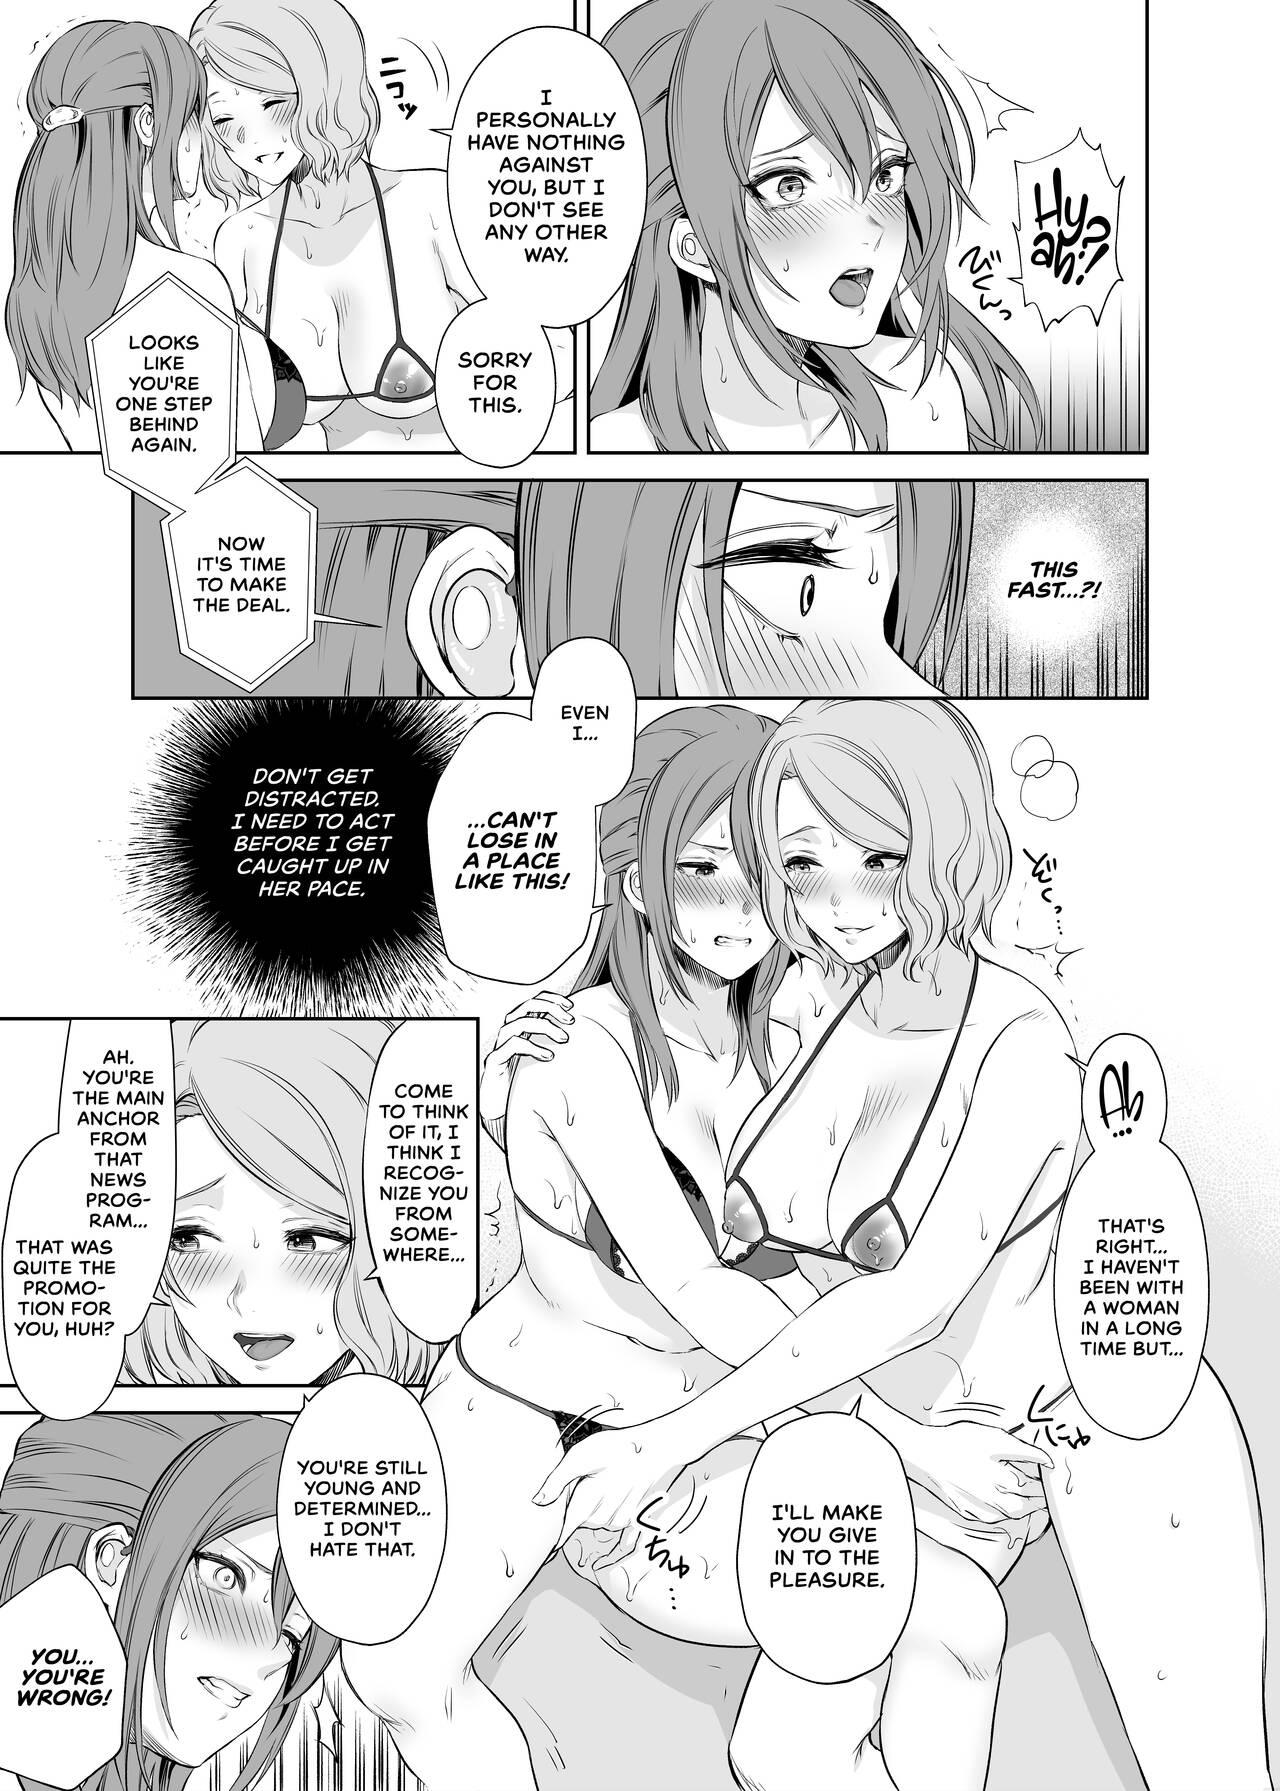 Thot [Remora Works (Meriko)] LesFes Co -Candid Reporting- Vol. 003 [English] - Original Amateur - Page 8